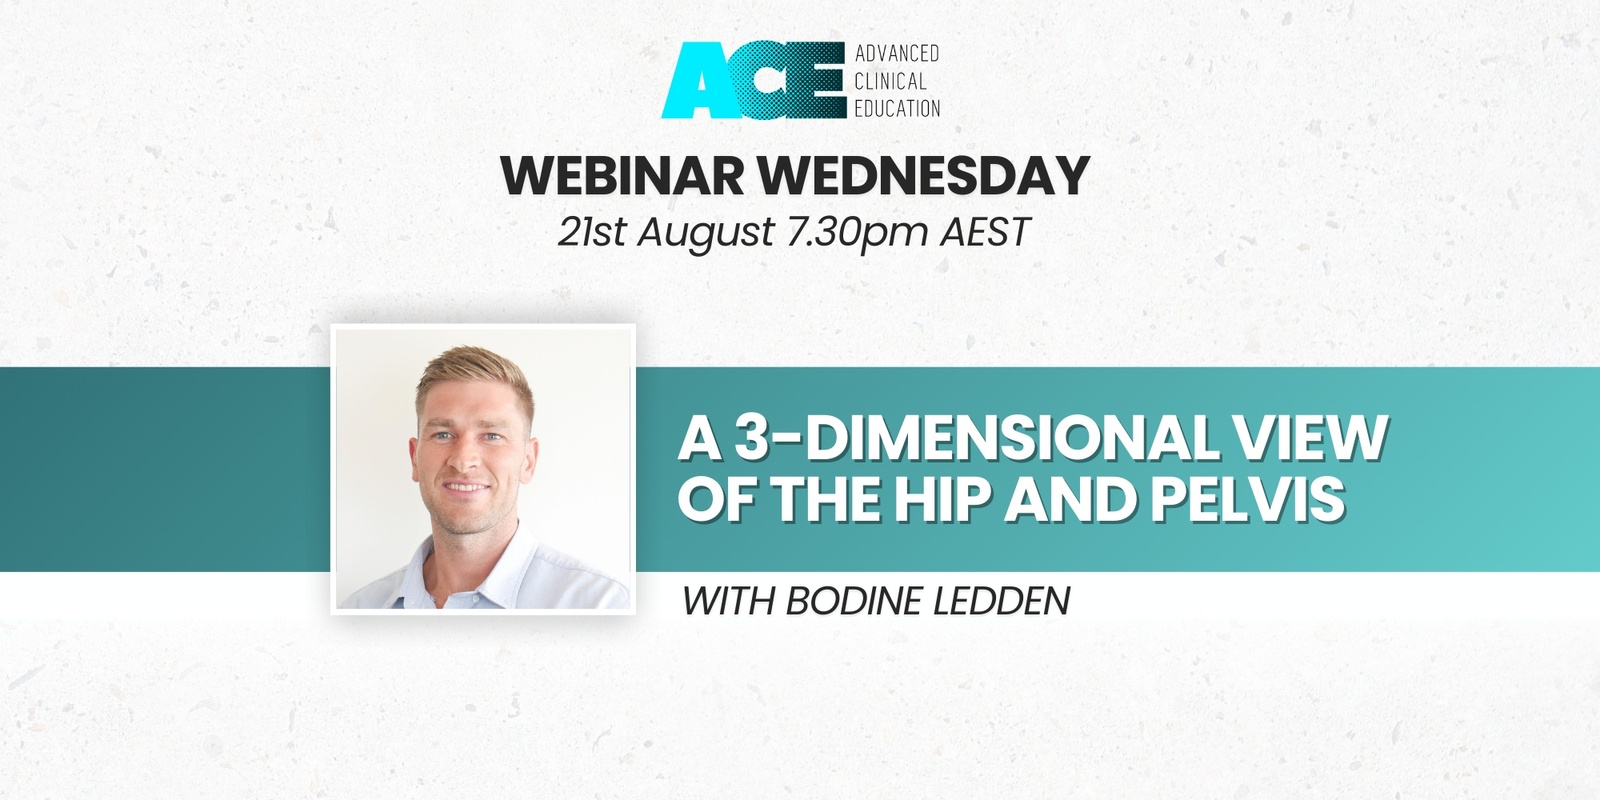 Banner image for A 3-dimensional view of the hip and pelvis - with Bodine Ledden